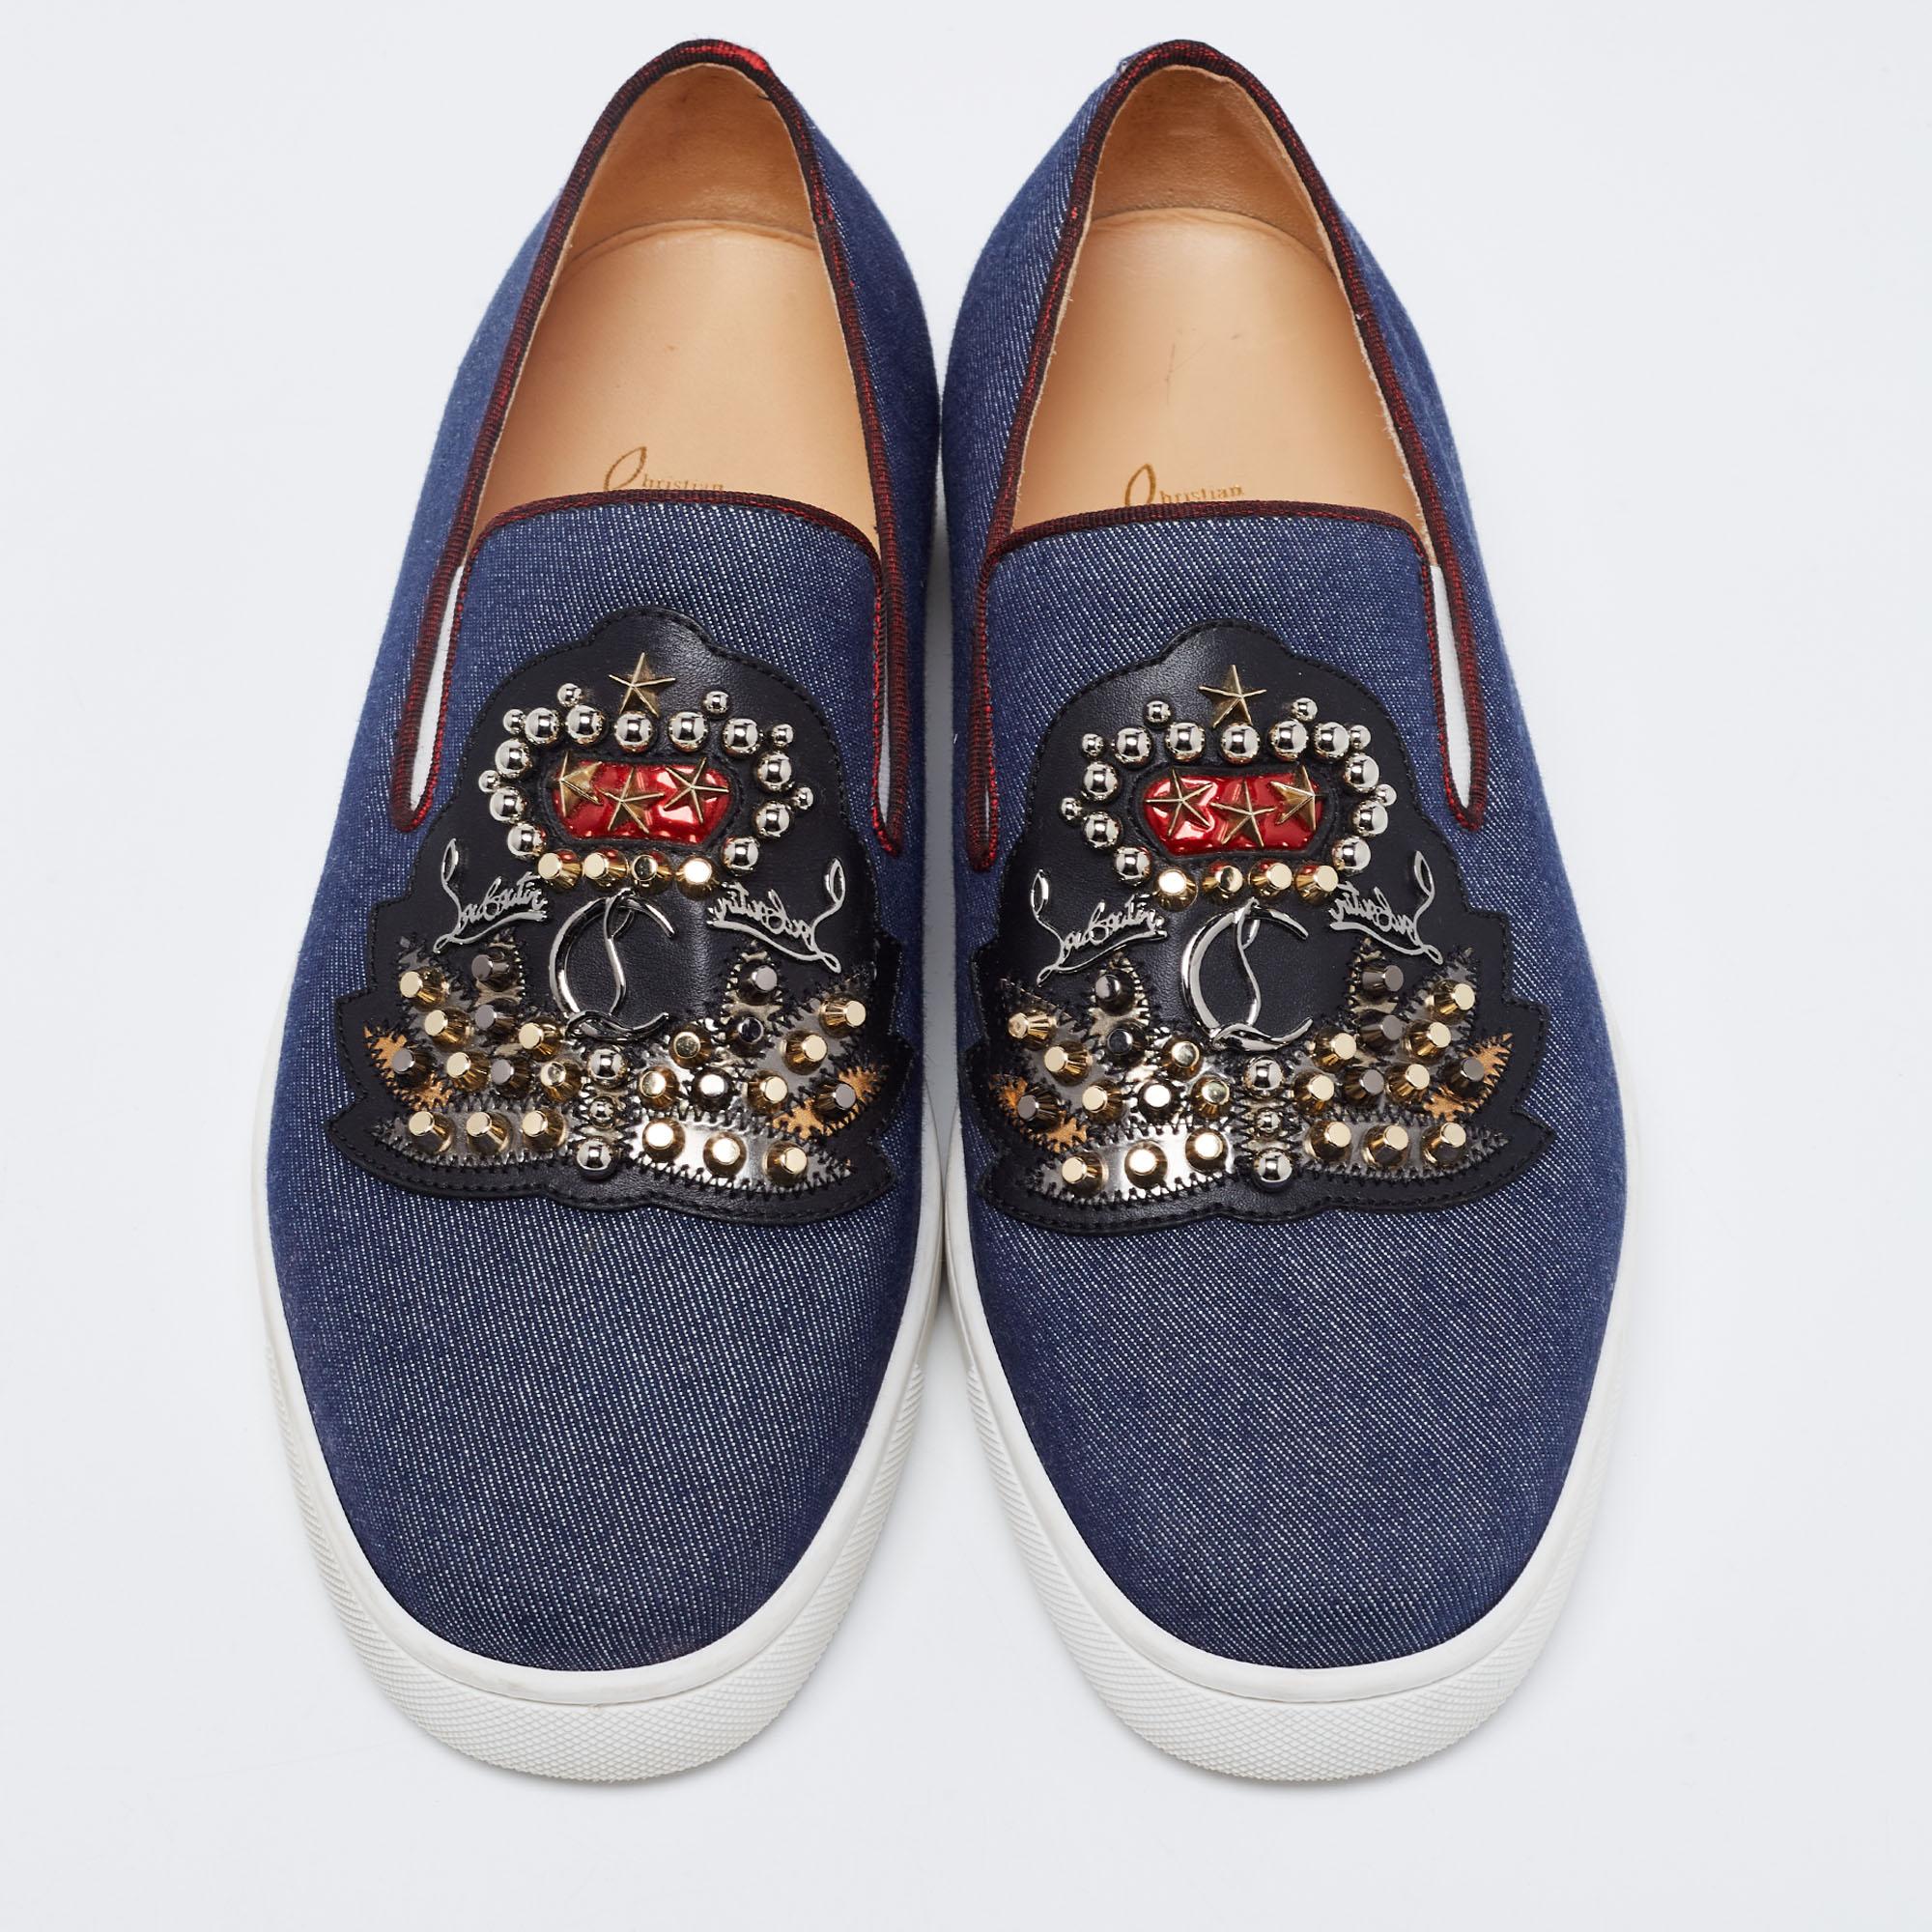 The embellishment on the uppers adds an extra edge to these Christian Louboutin sneakers. Created from denim, they are instantly recognizable with their signature red-lacquered soles and are functional with leather insoles.

